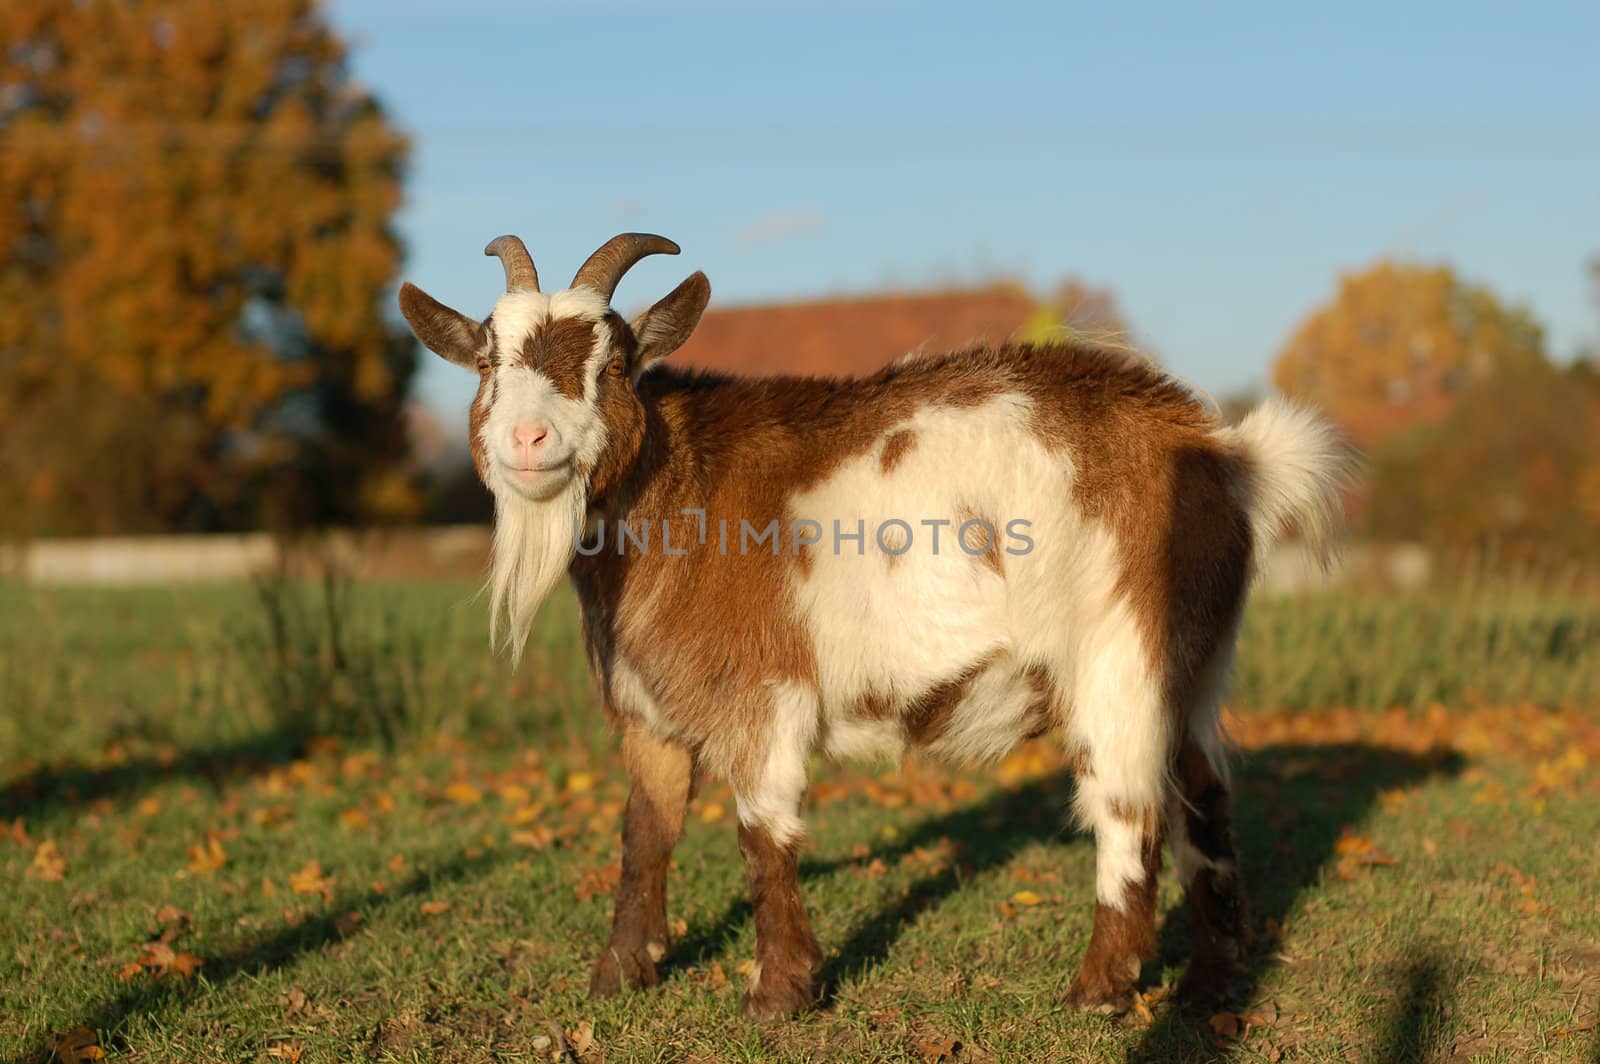 Red and white goat standing in warm sunlight in a field